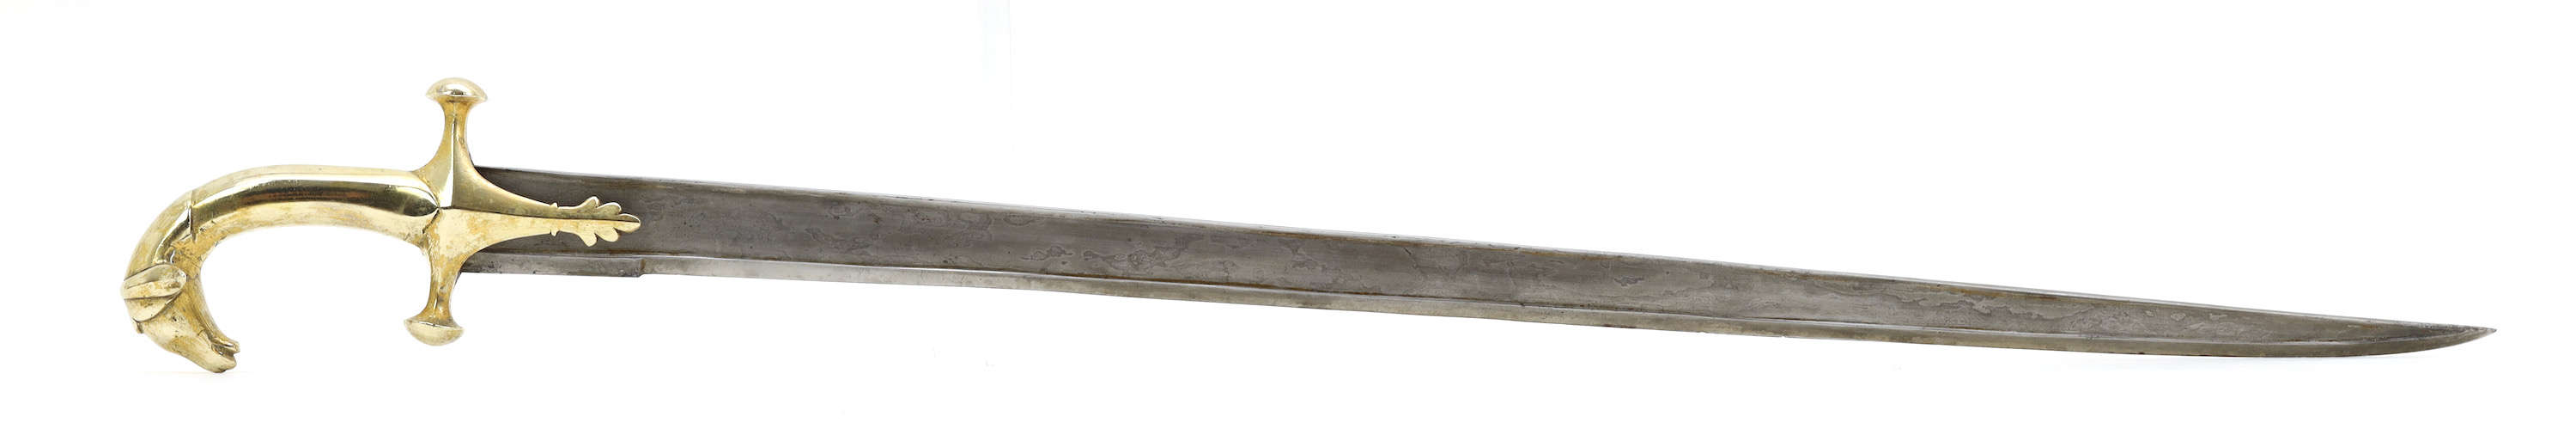 Ghoat hilted Khyber sword